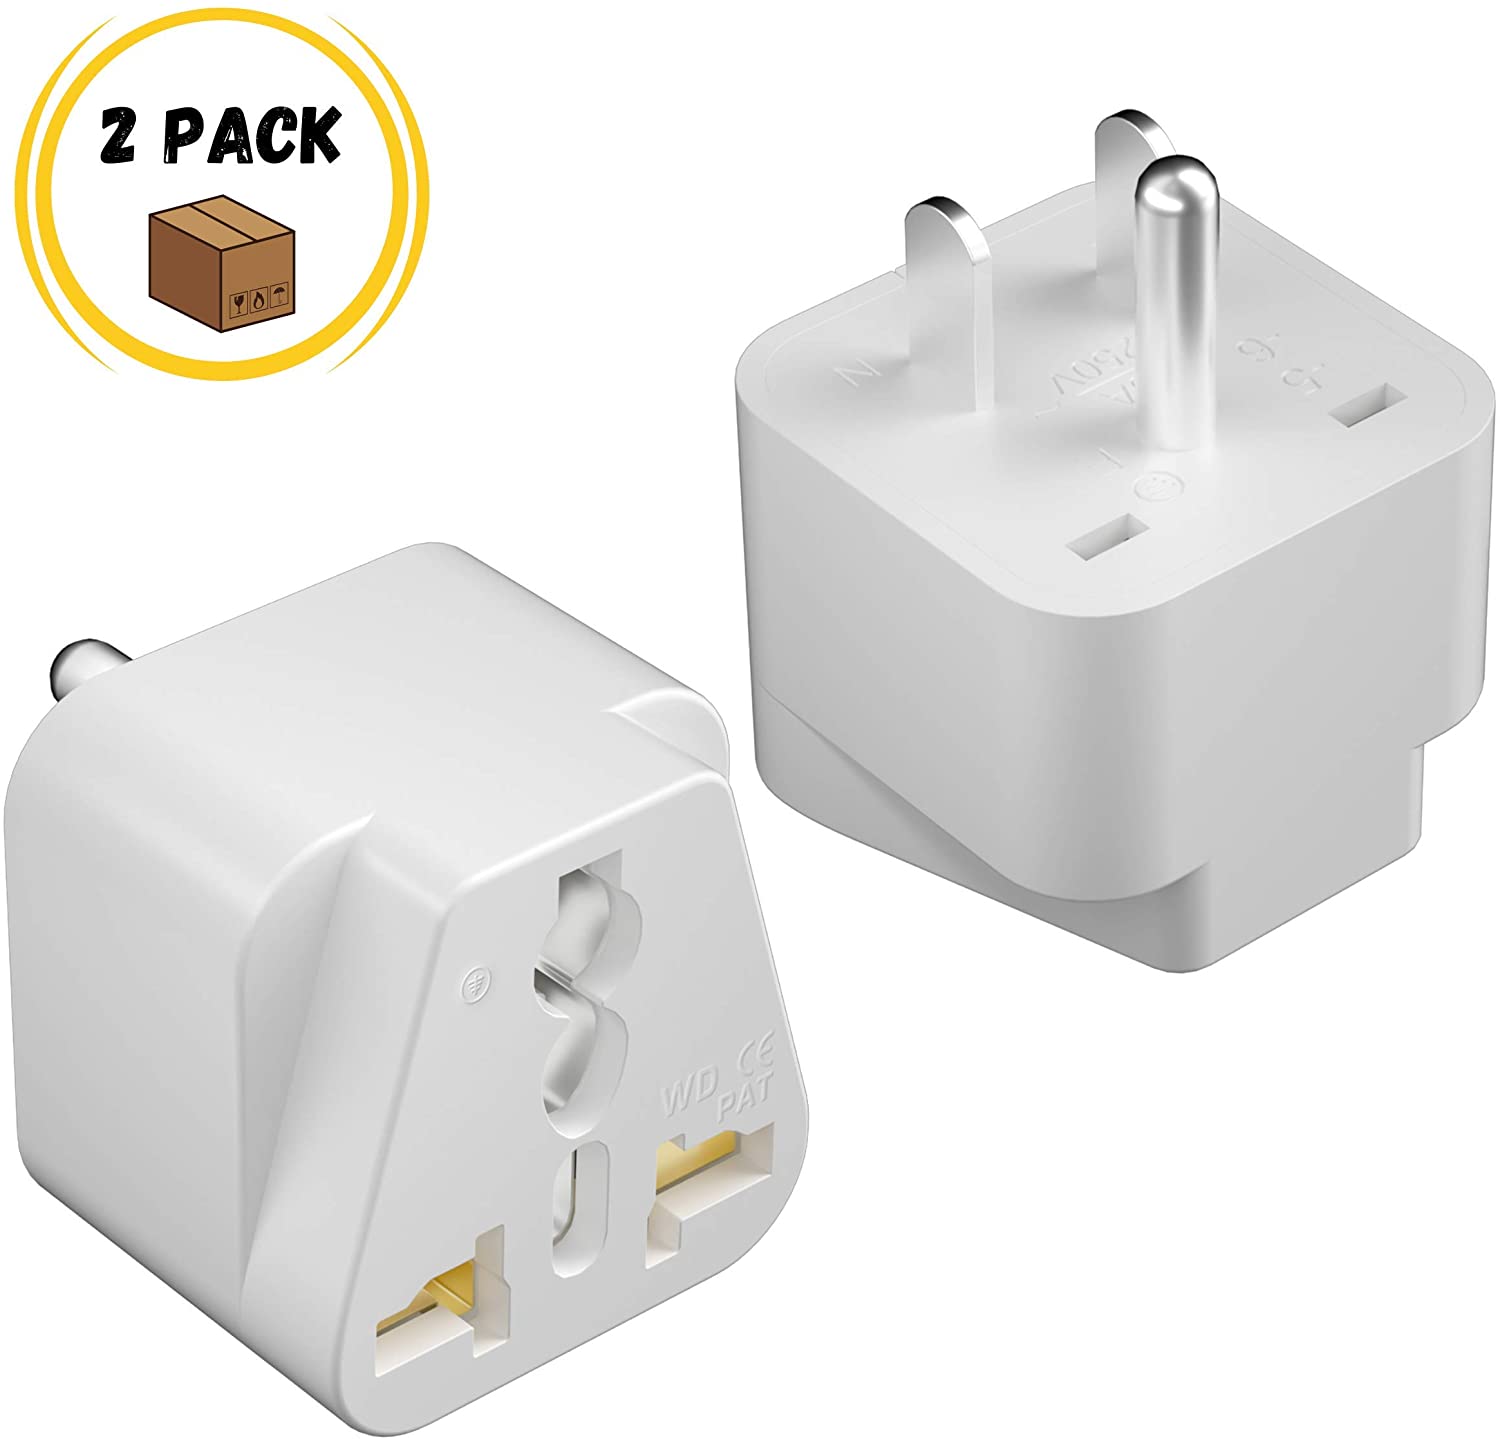 Bates- Universal to American Outlet Plug Adapter, 2 Pack, Canada Universal Travel  Plug Adapter, 2 pc, UK to US Adapter, US Plug Adapter - Bates Choice